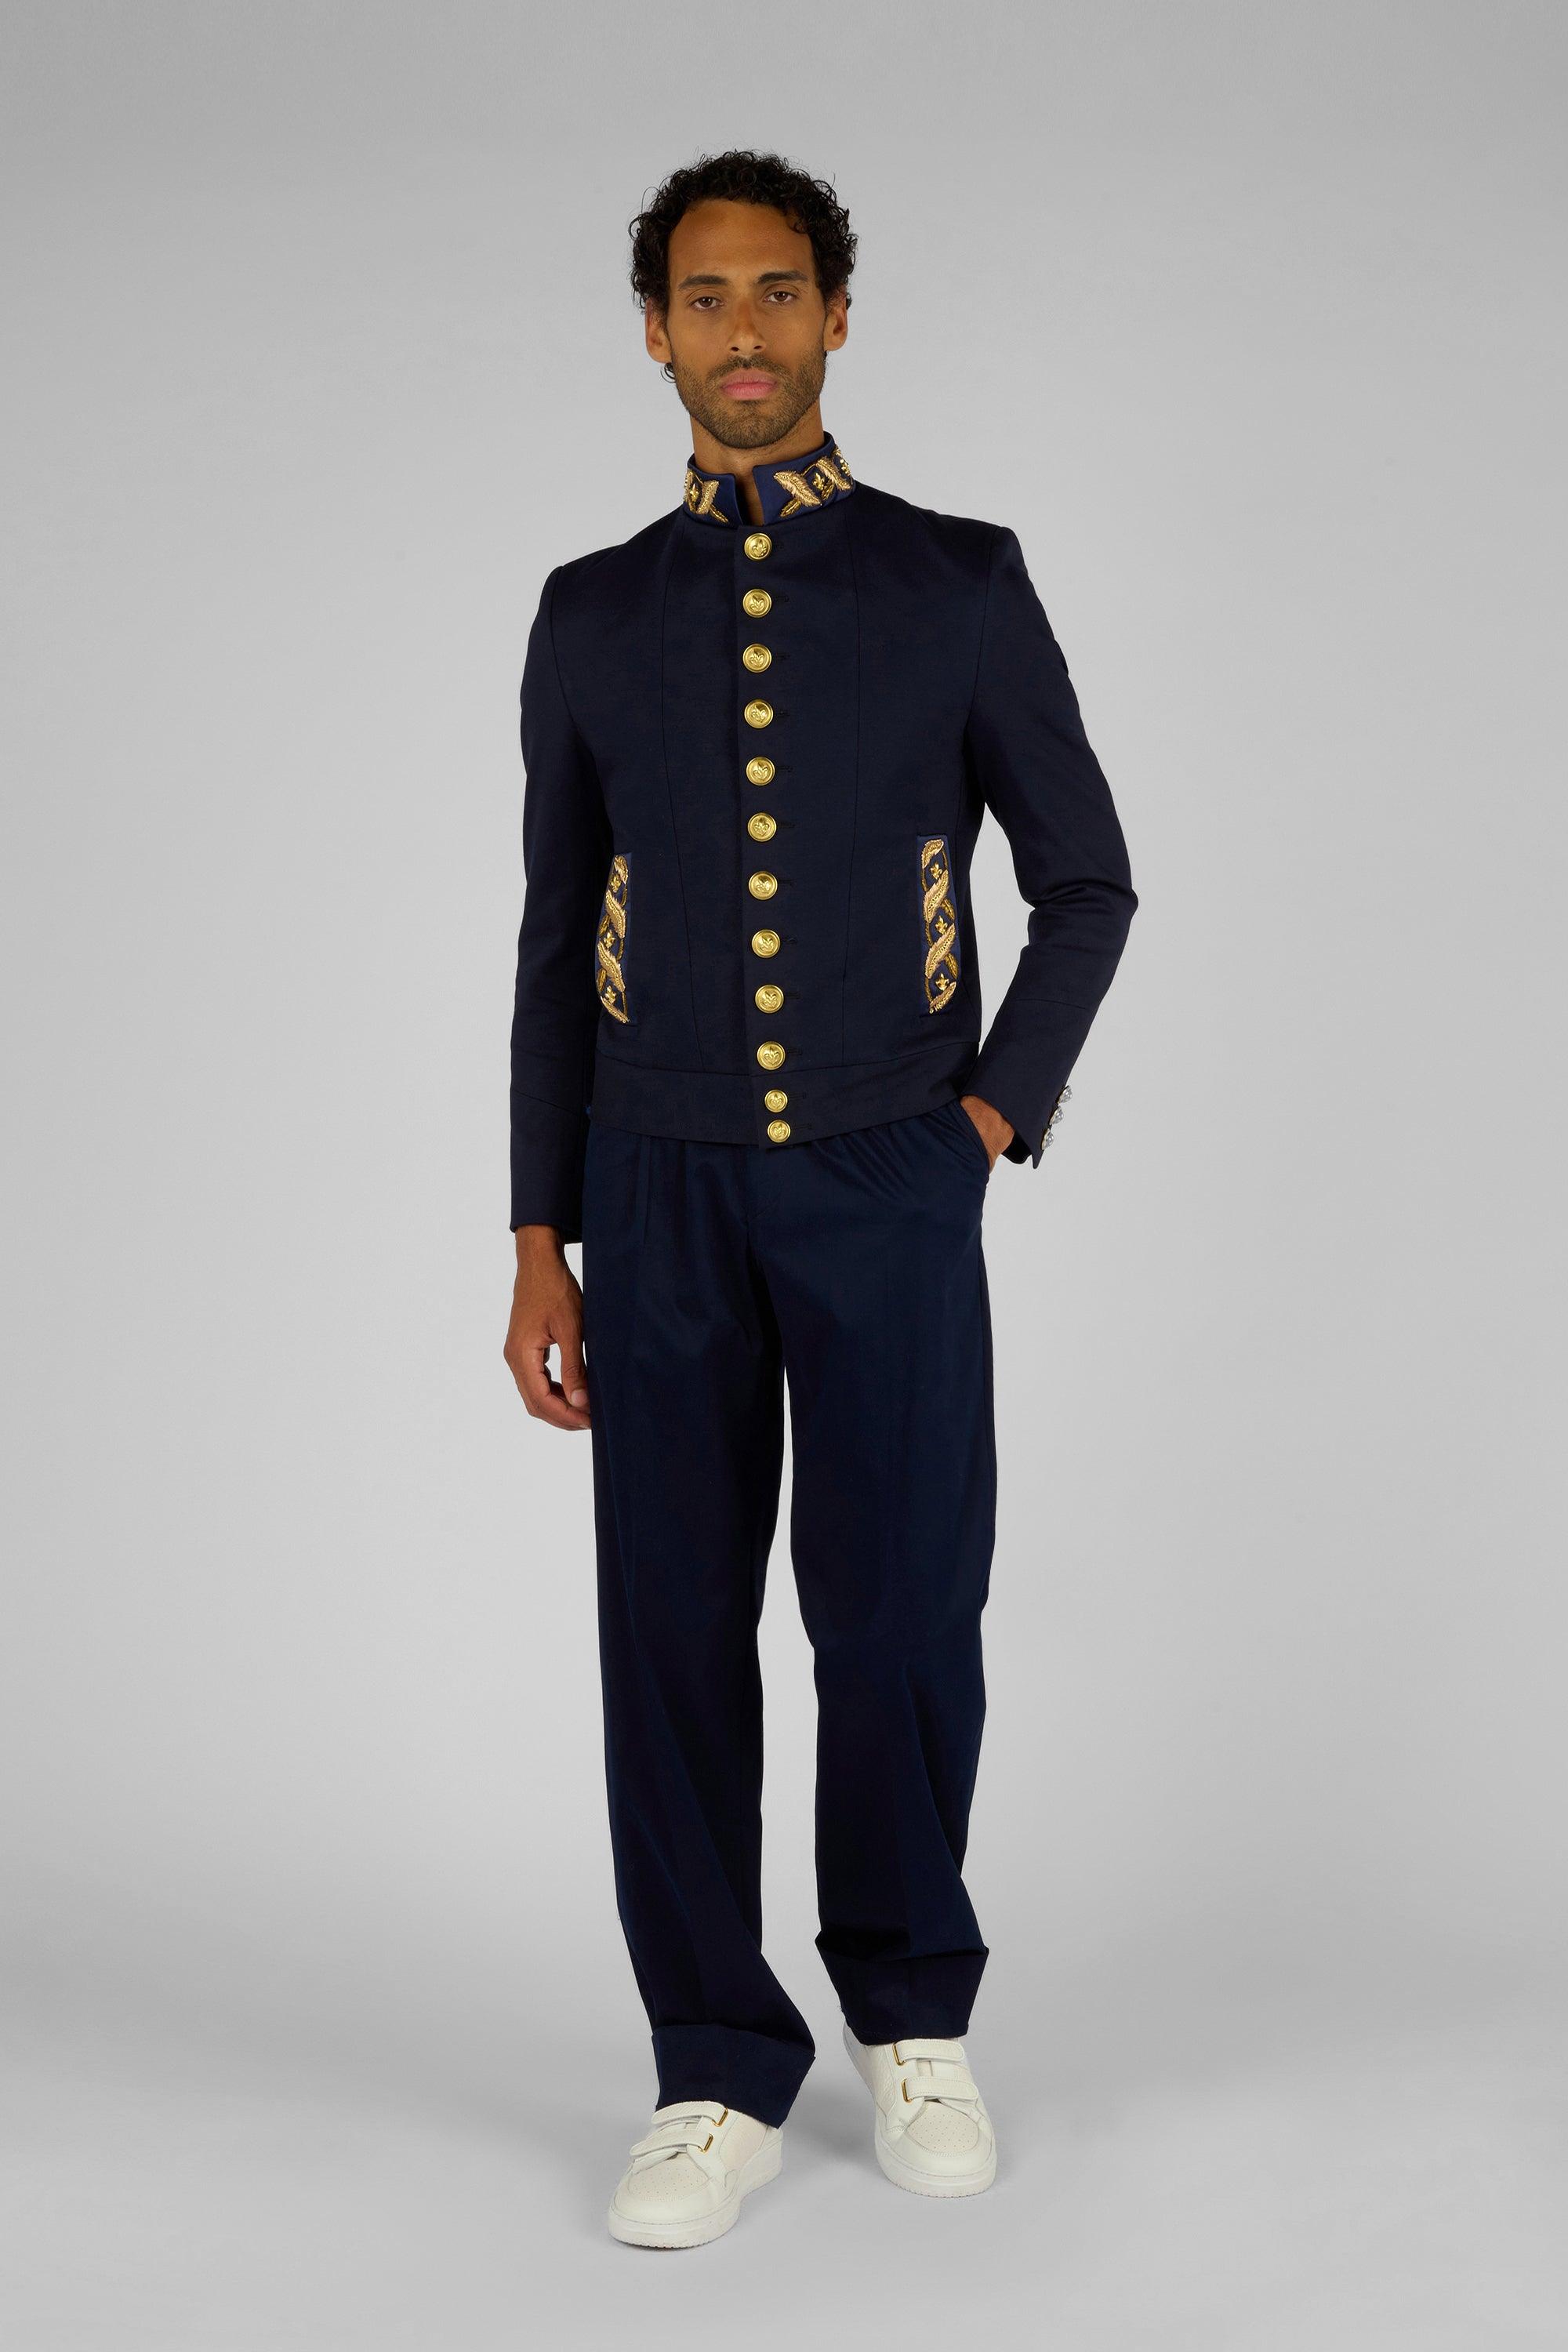 MANTEAU MILITAIRE BRODE COURT - Lords & Fools broderies, dandy, frenchstyle, menfashion, militaire, Mood_Military, paris, parisianstyle, S24, suit, SUMMER 2024, tailoring